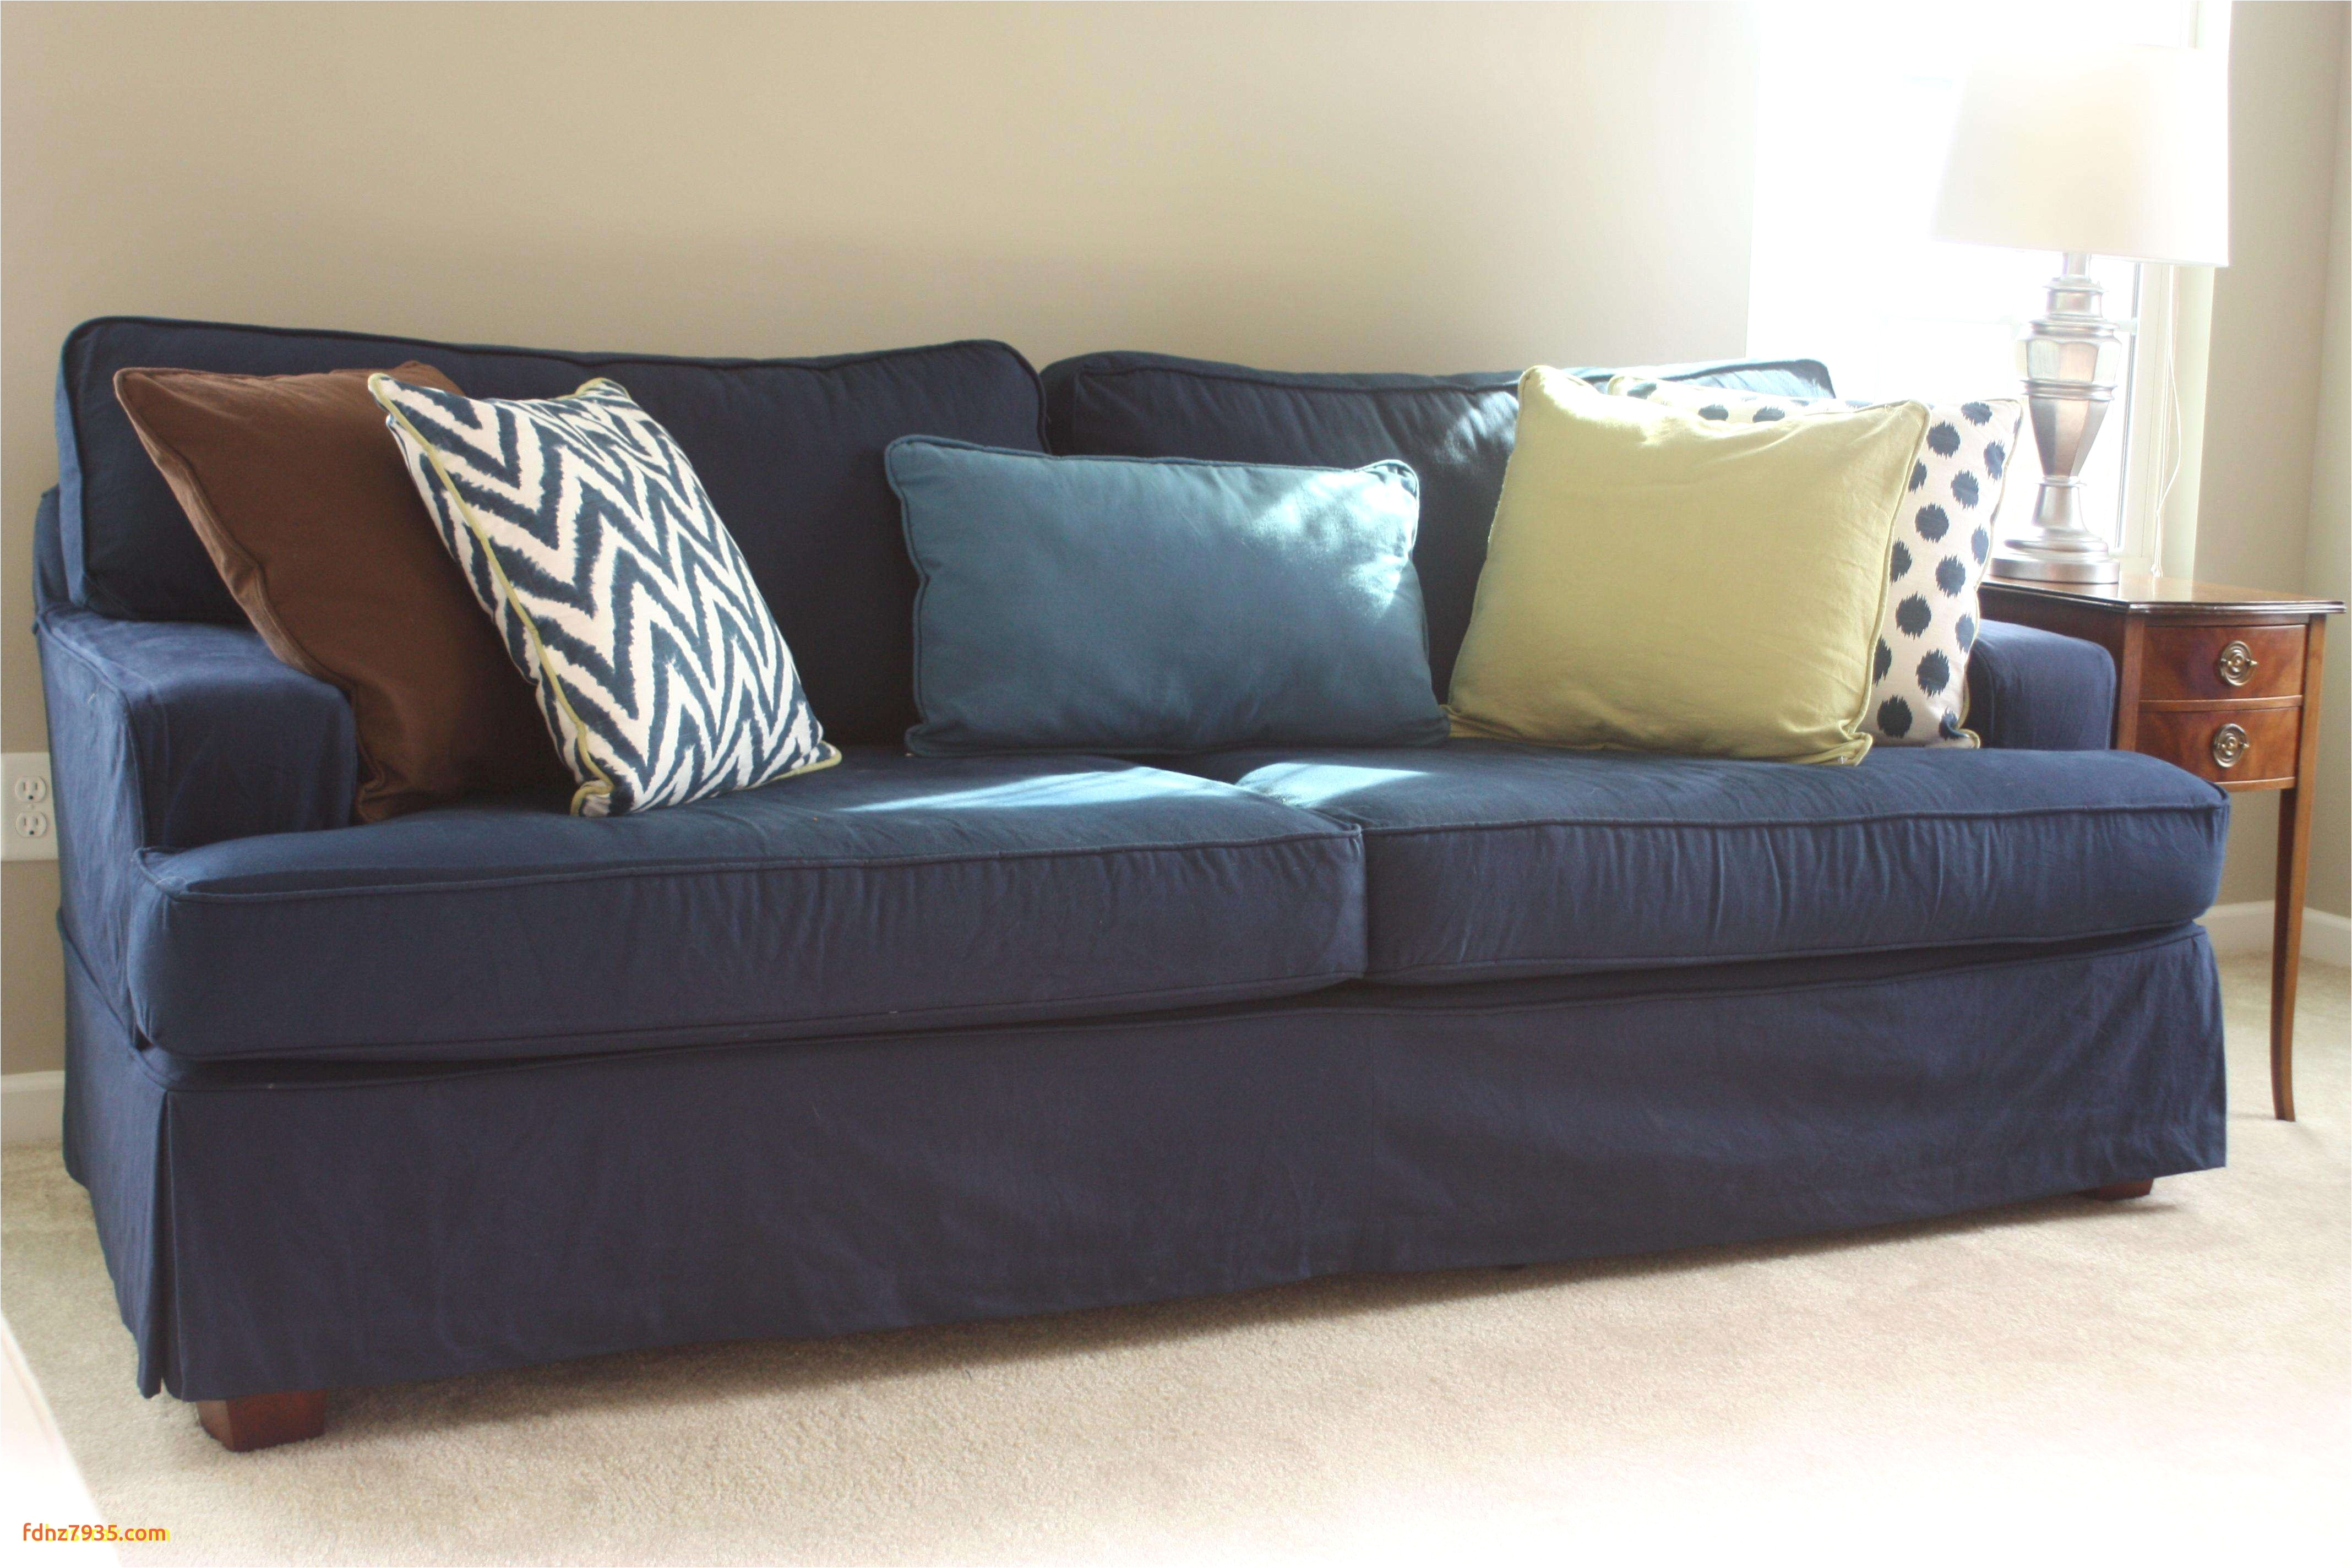 full size of furniture leather sectional couch awesome furniture leather loveseats awesome navy loveseat 0d